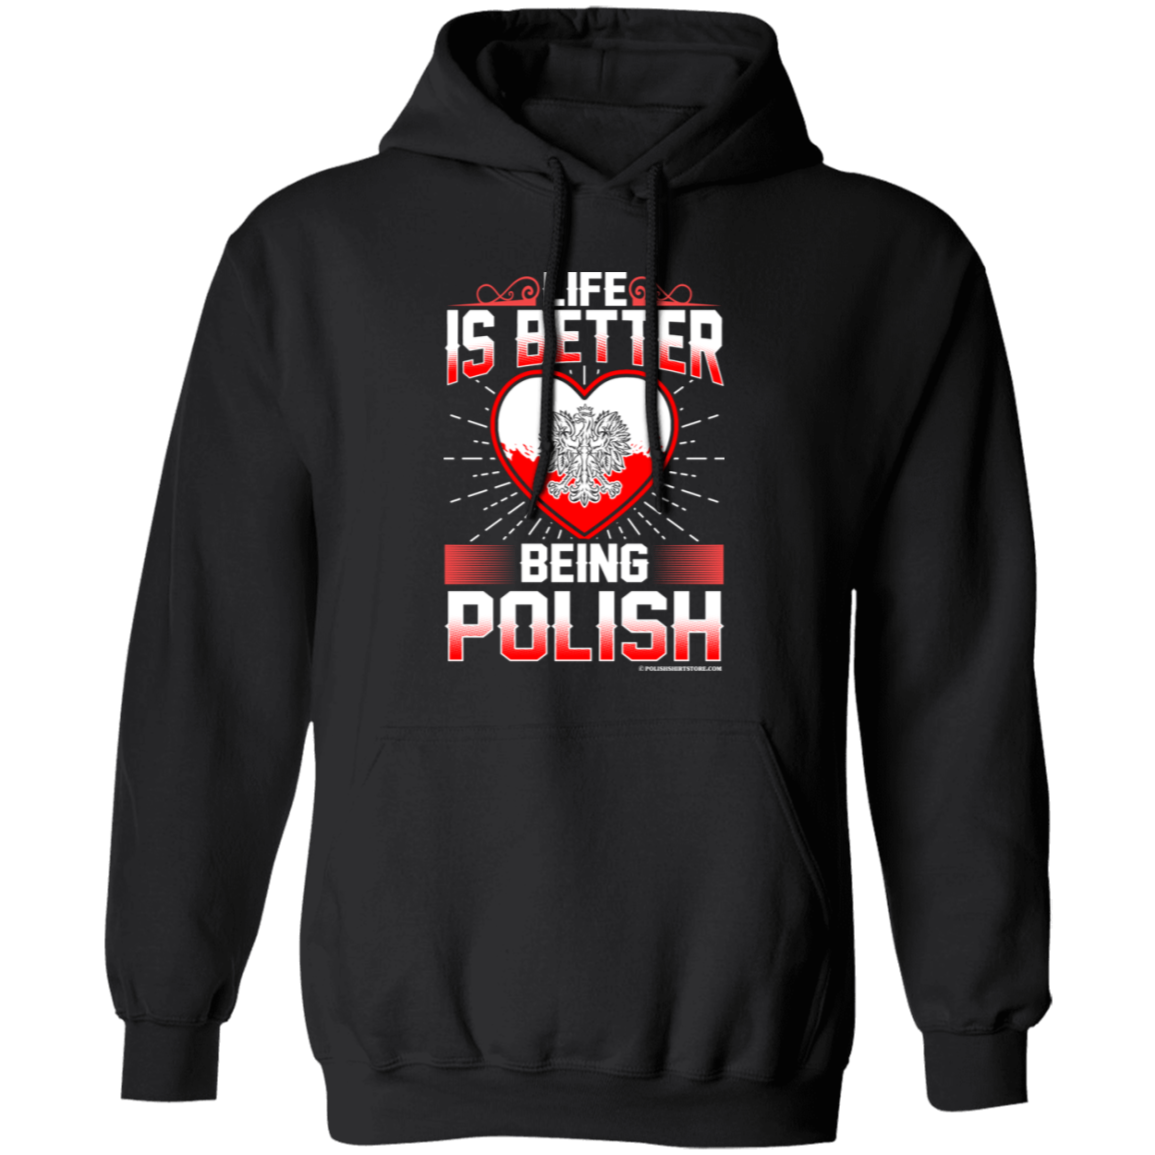 Life Is Better Being Polish Apparel CustomCat G185 Pullover Hoodie Black S